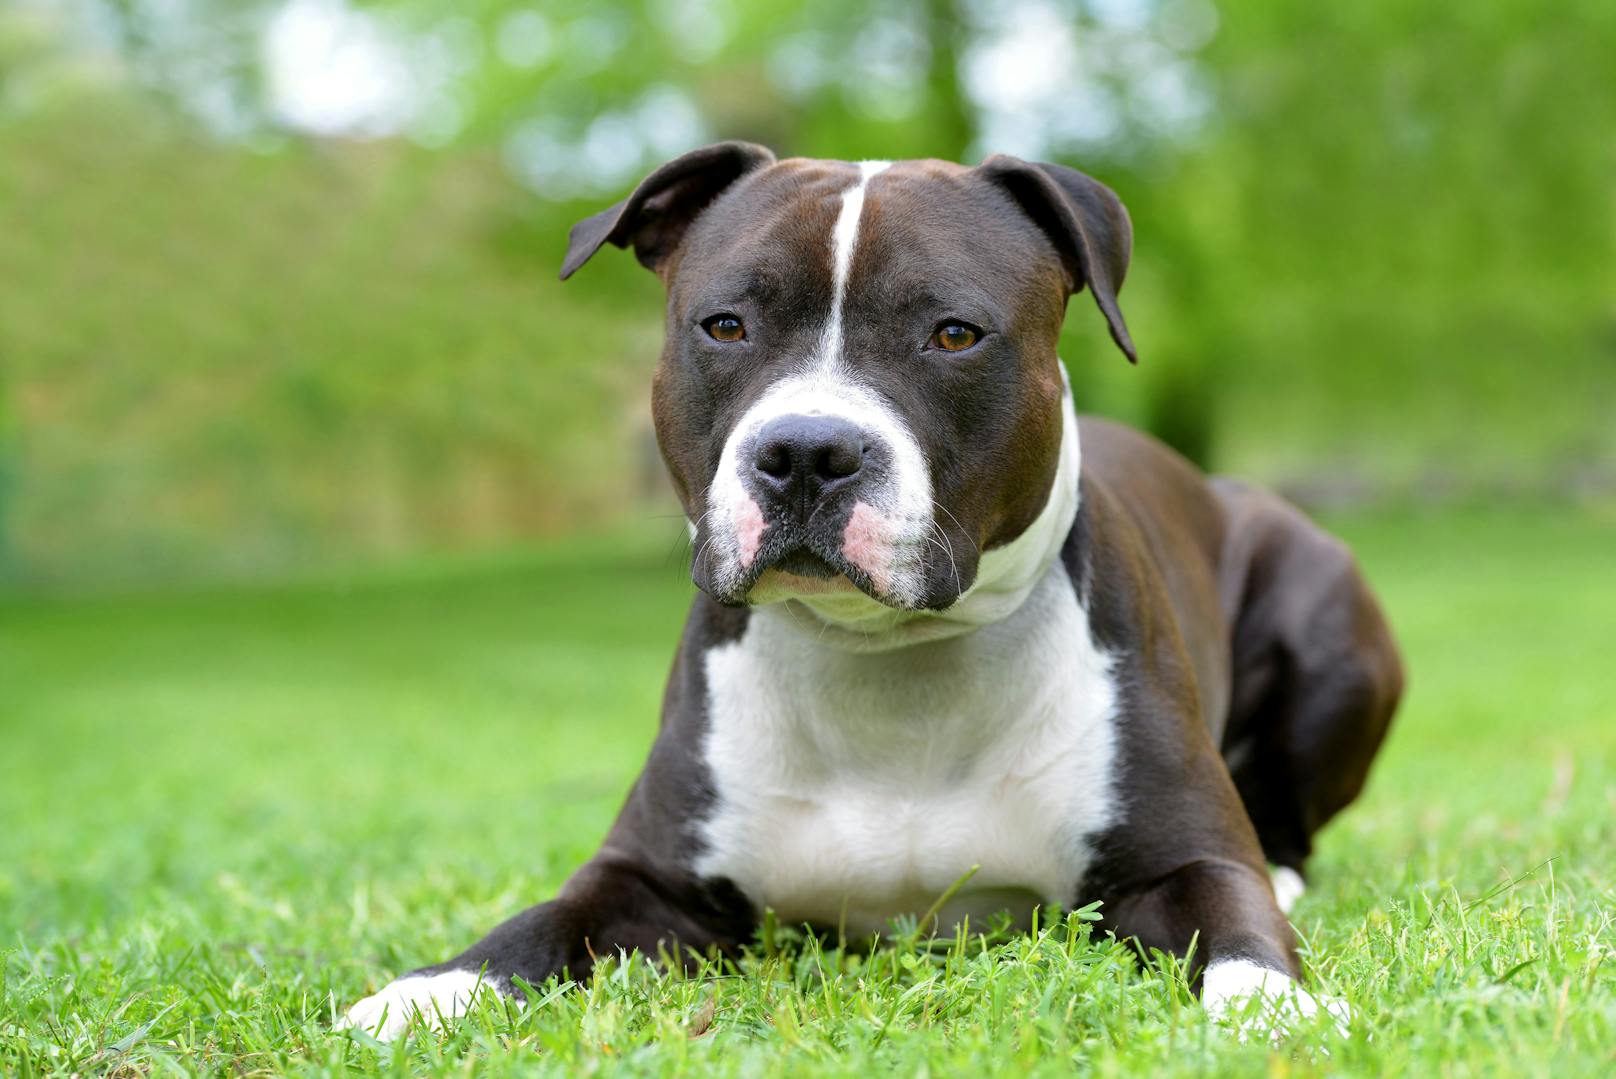 5. American Staffordshire Terrier